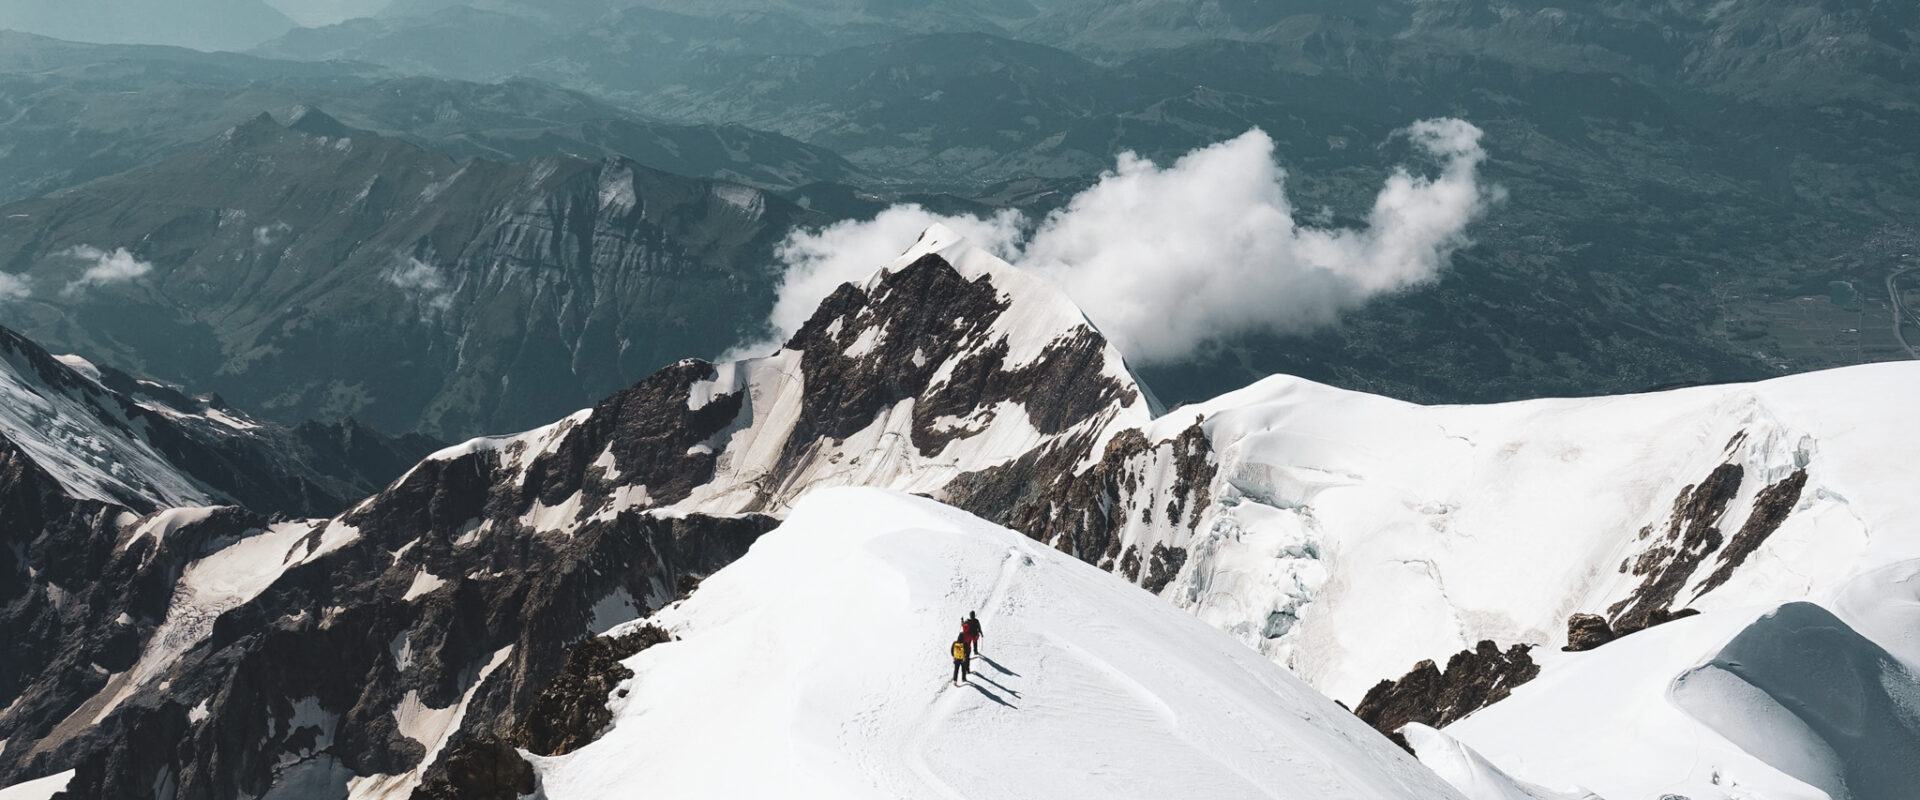 Mont Blanc: Is this the Perfect First Technical Summit or Not?